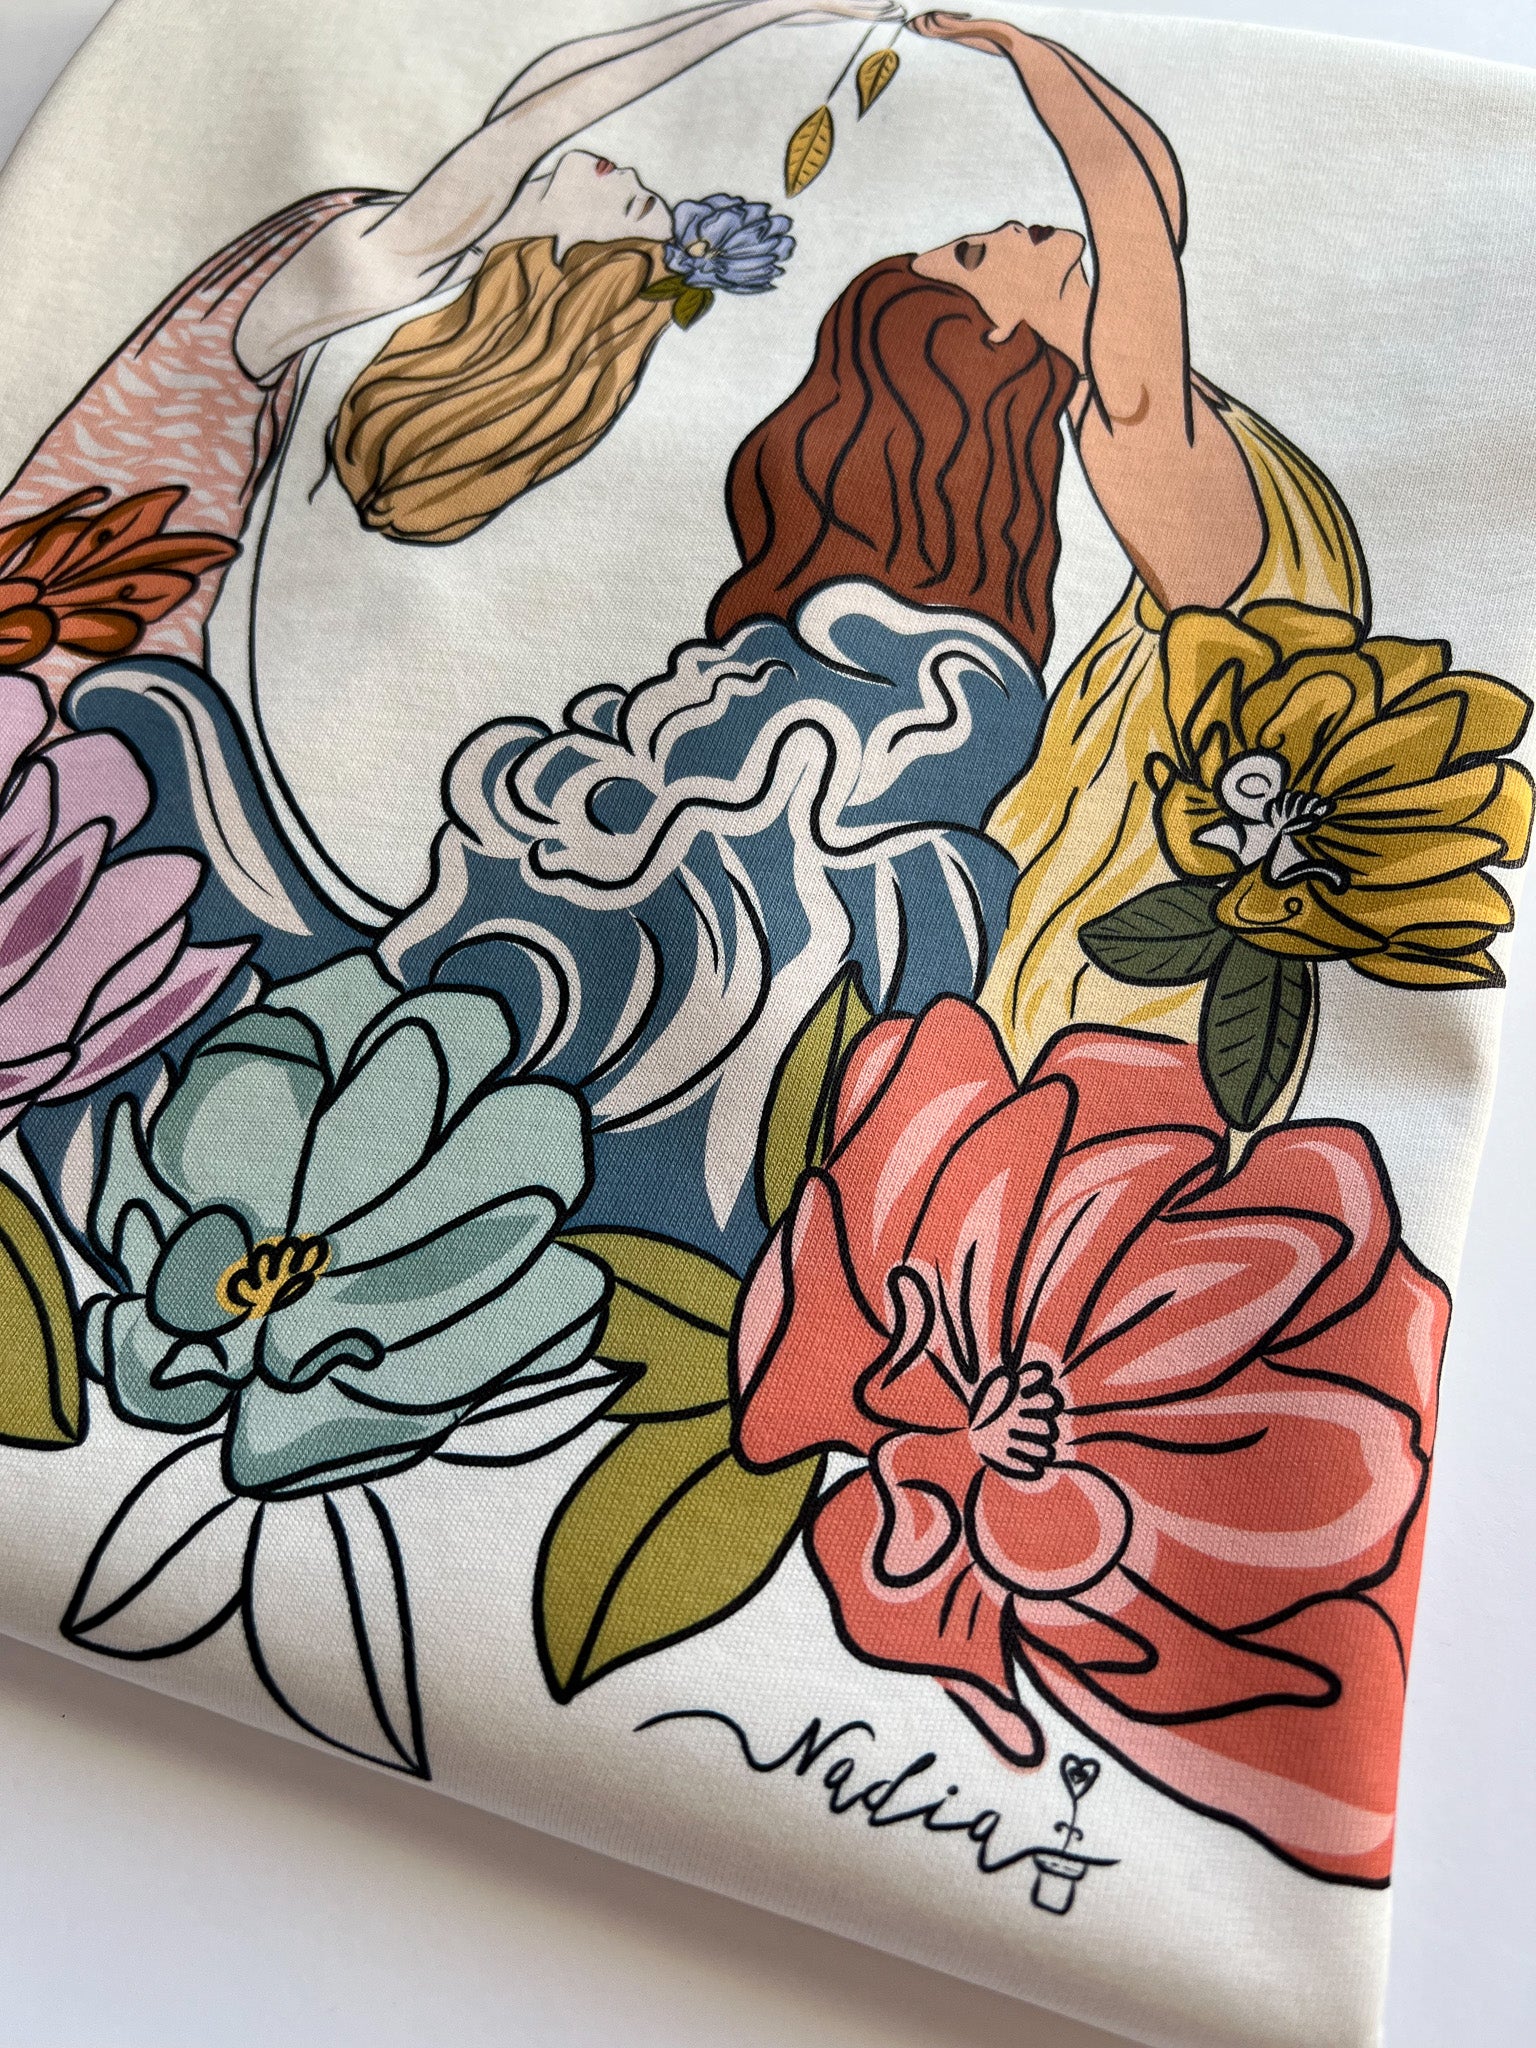 Womenderful is a female-led design studio that creates original and empowering art. This graphic tee features our Sea Goddesses hand-drawn print